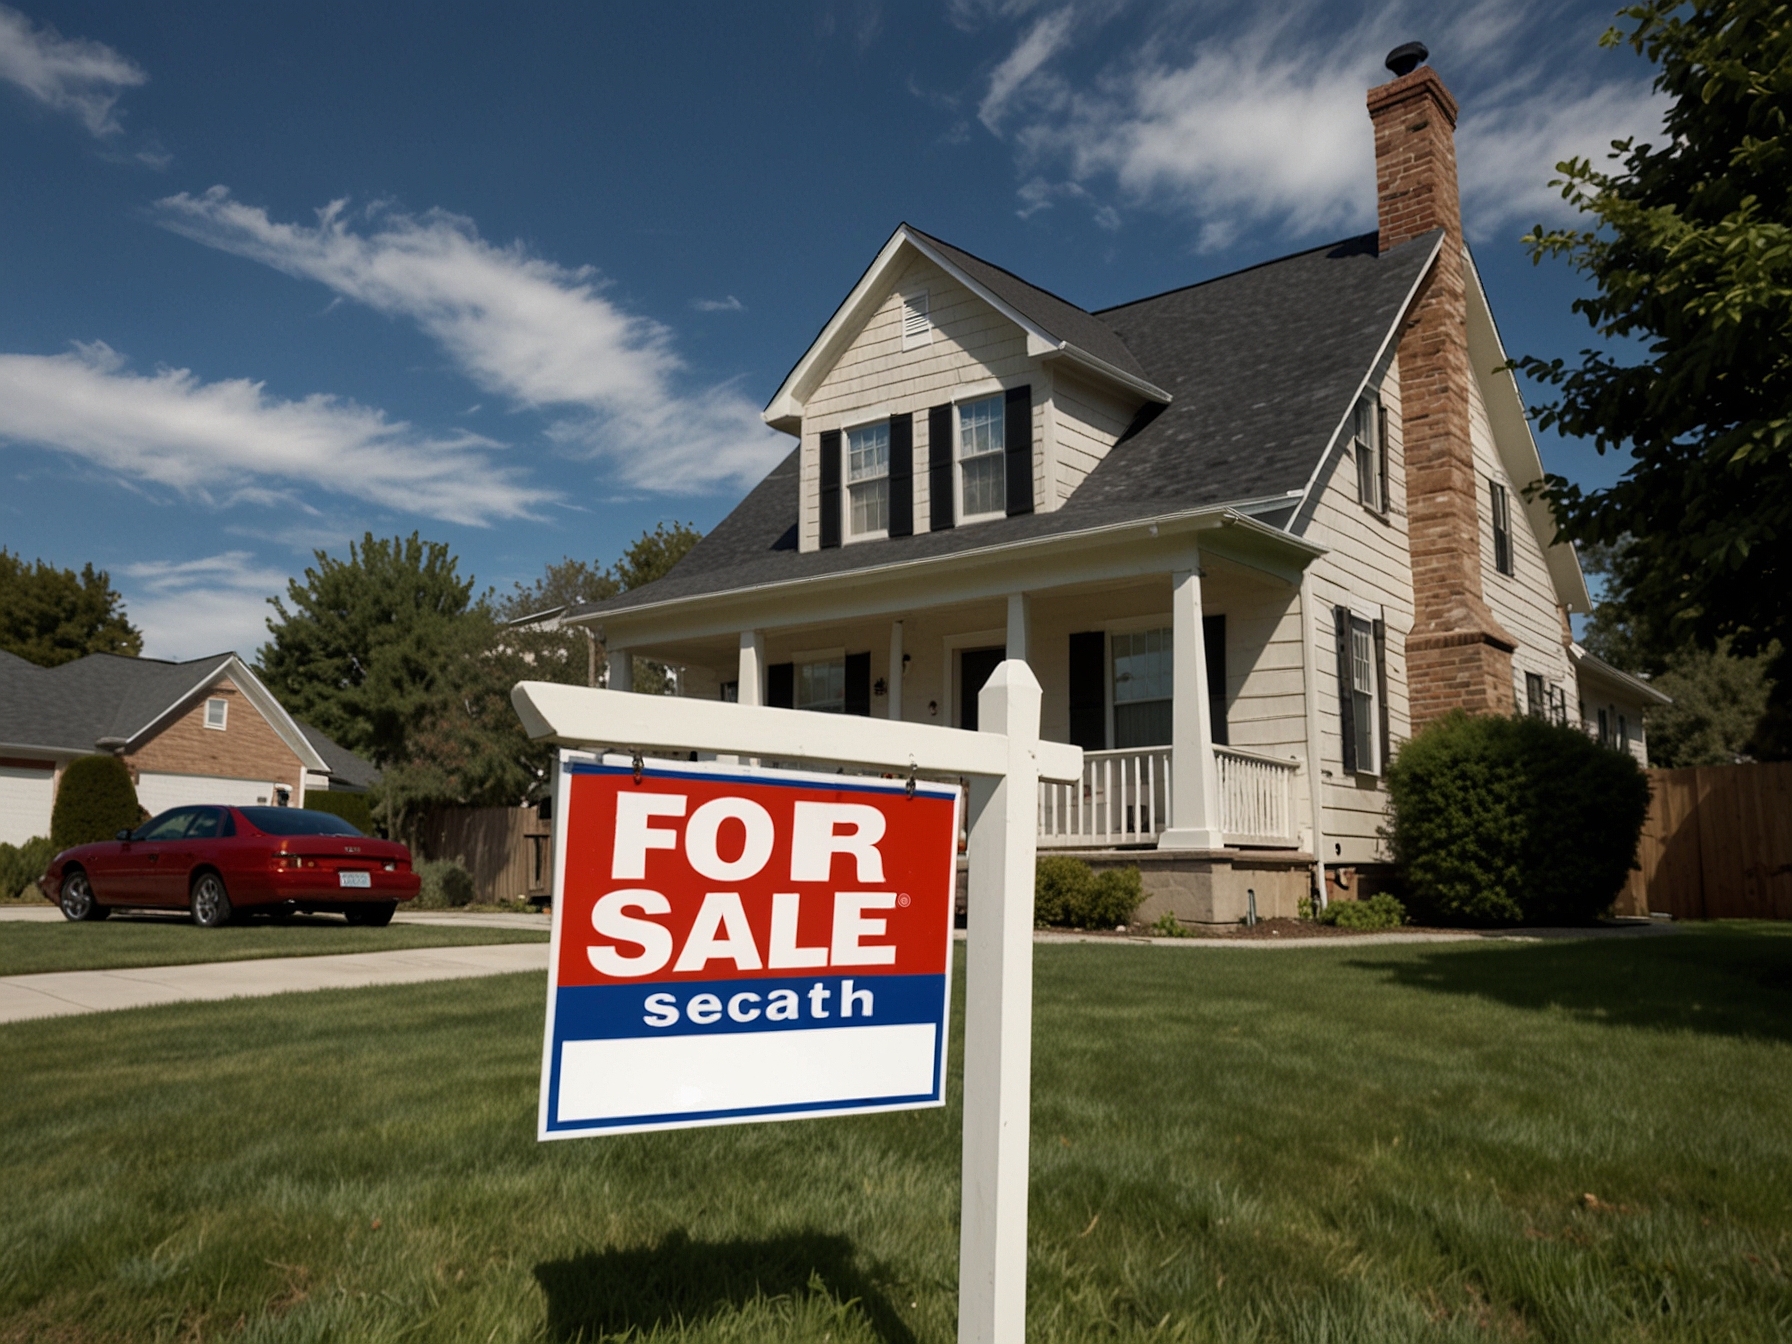 An image showing a 'For Sale' sign in front of a house, with a graphical overlay illustrating the falling home sales trend and rising mortgage rates impacting the U.S. housing market.